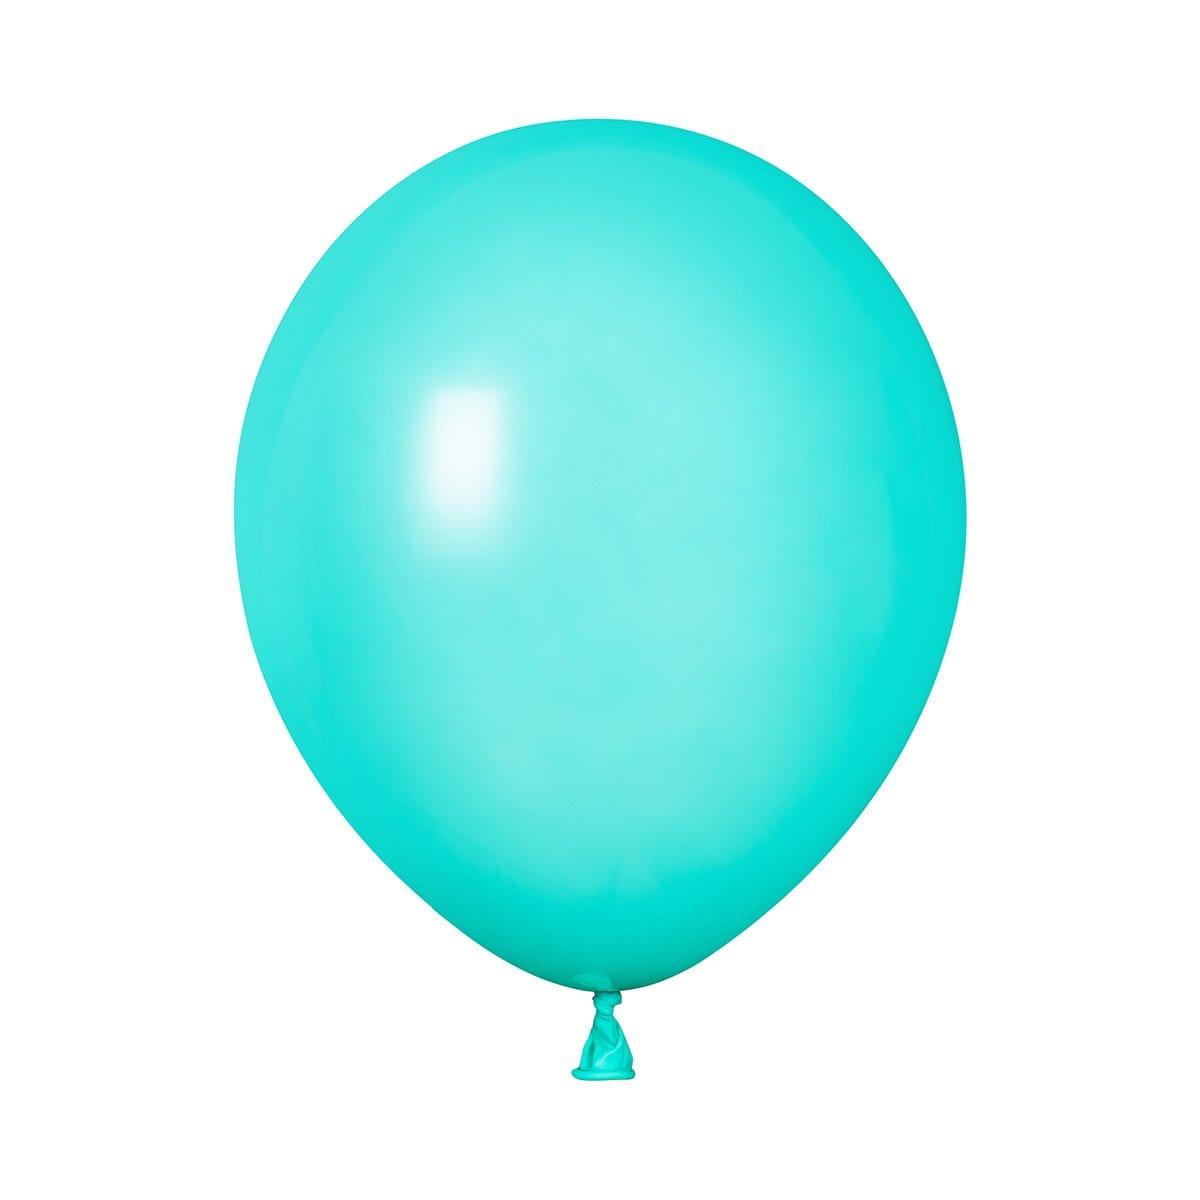 Buy Balloons Caribbean Blue Latex Balloon 5 Inches, 100 Count sold at Party Expert